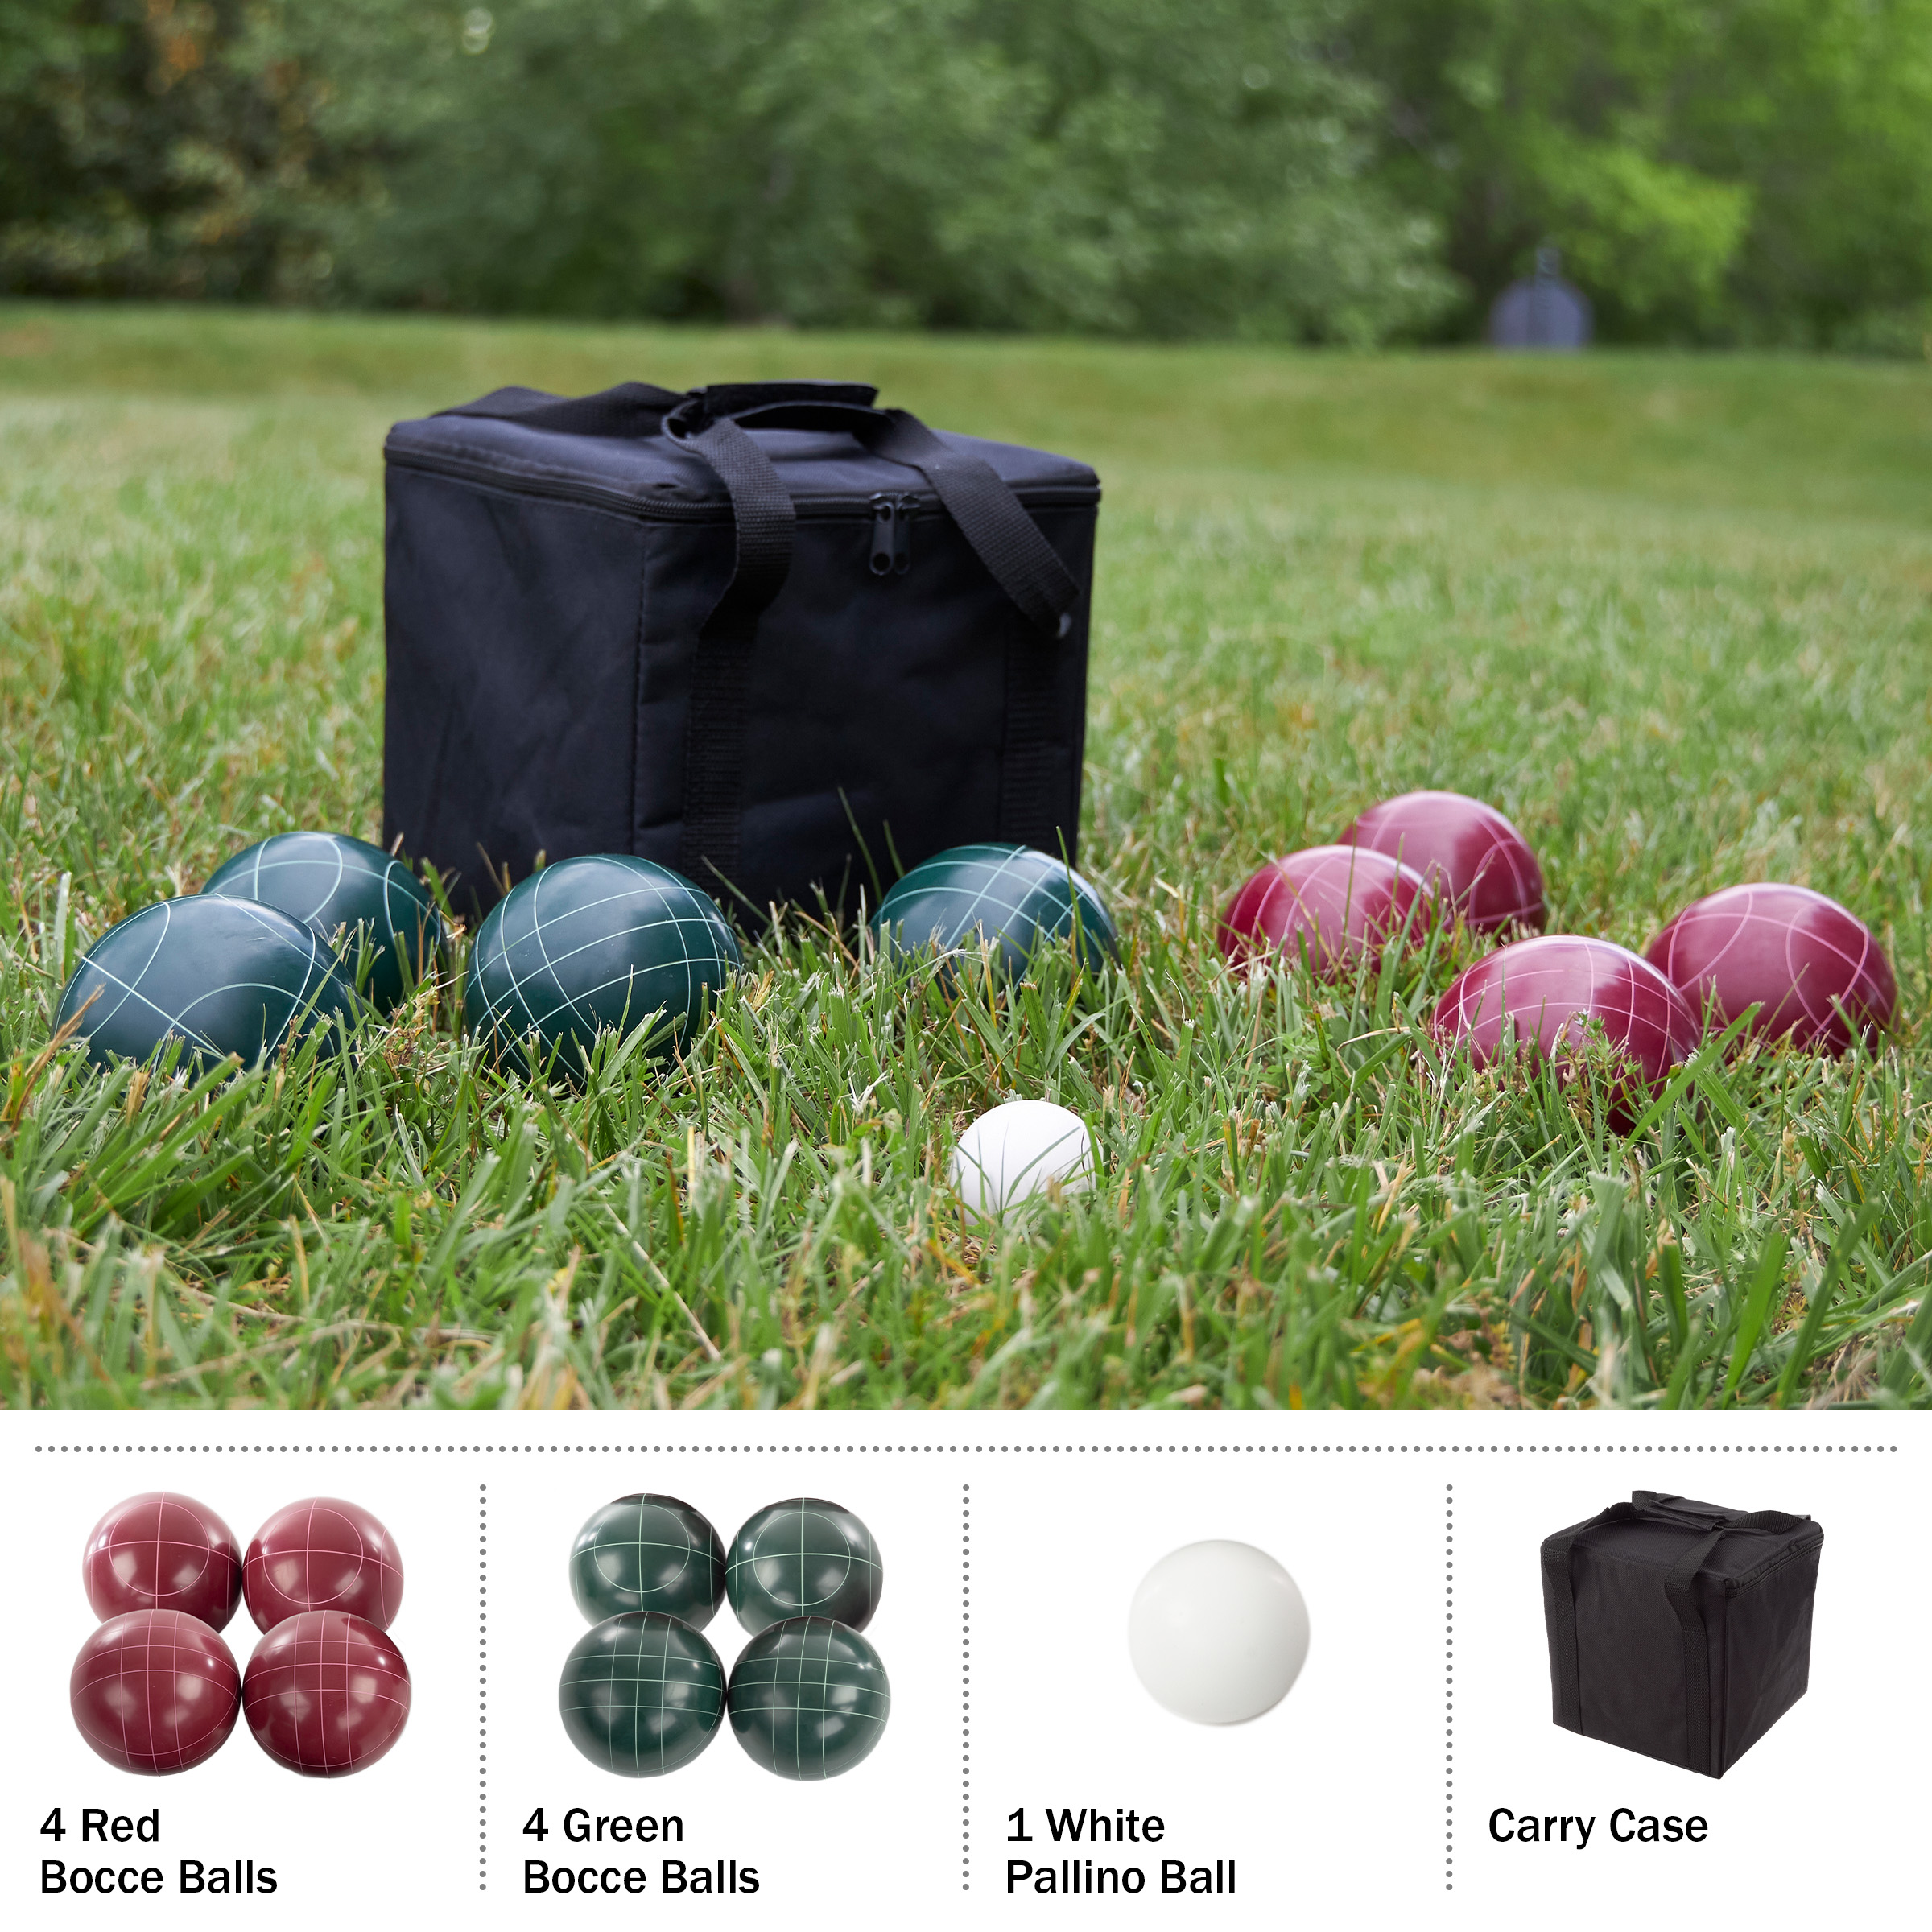 Leisure petanque set with satchel and jack to be personalized